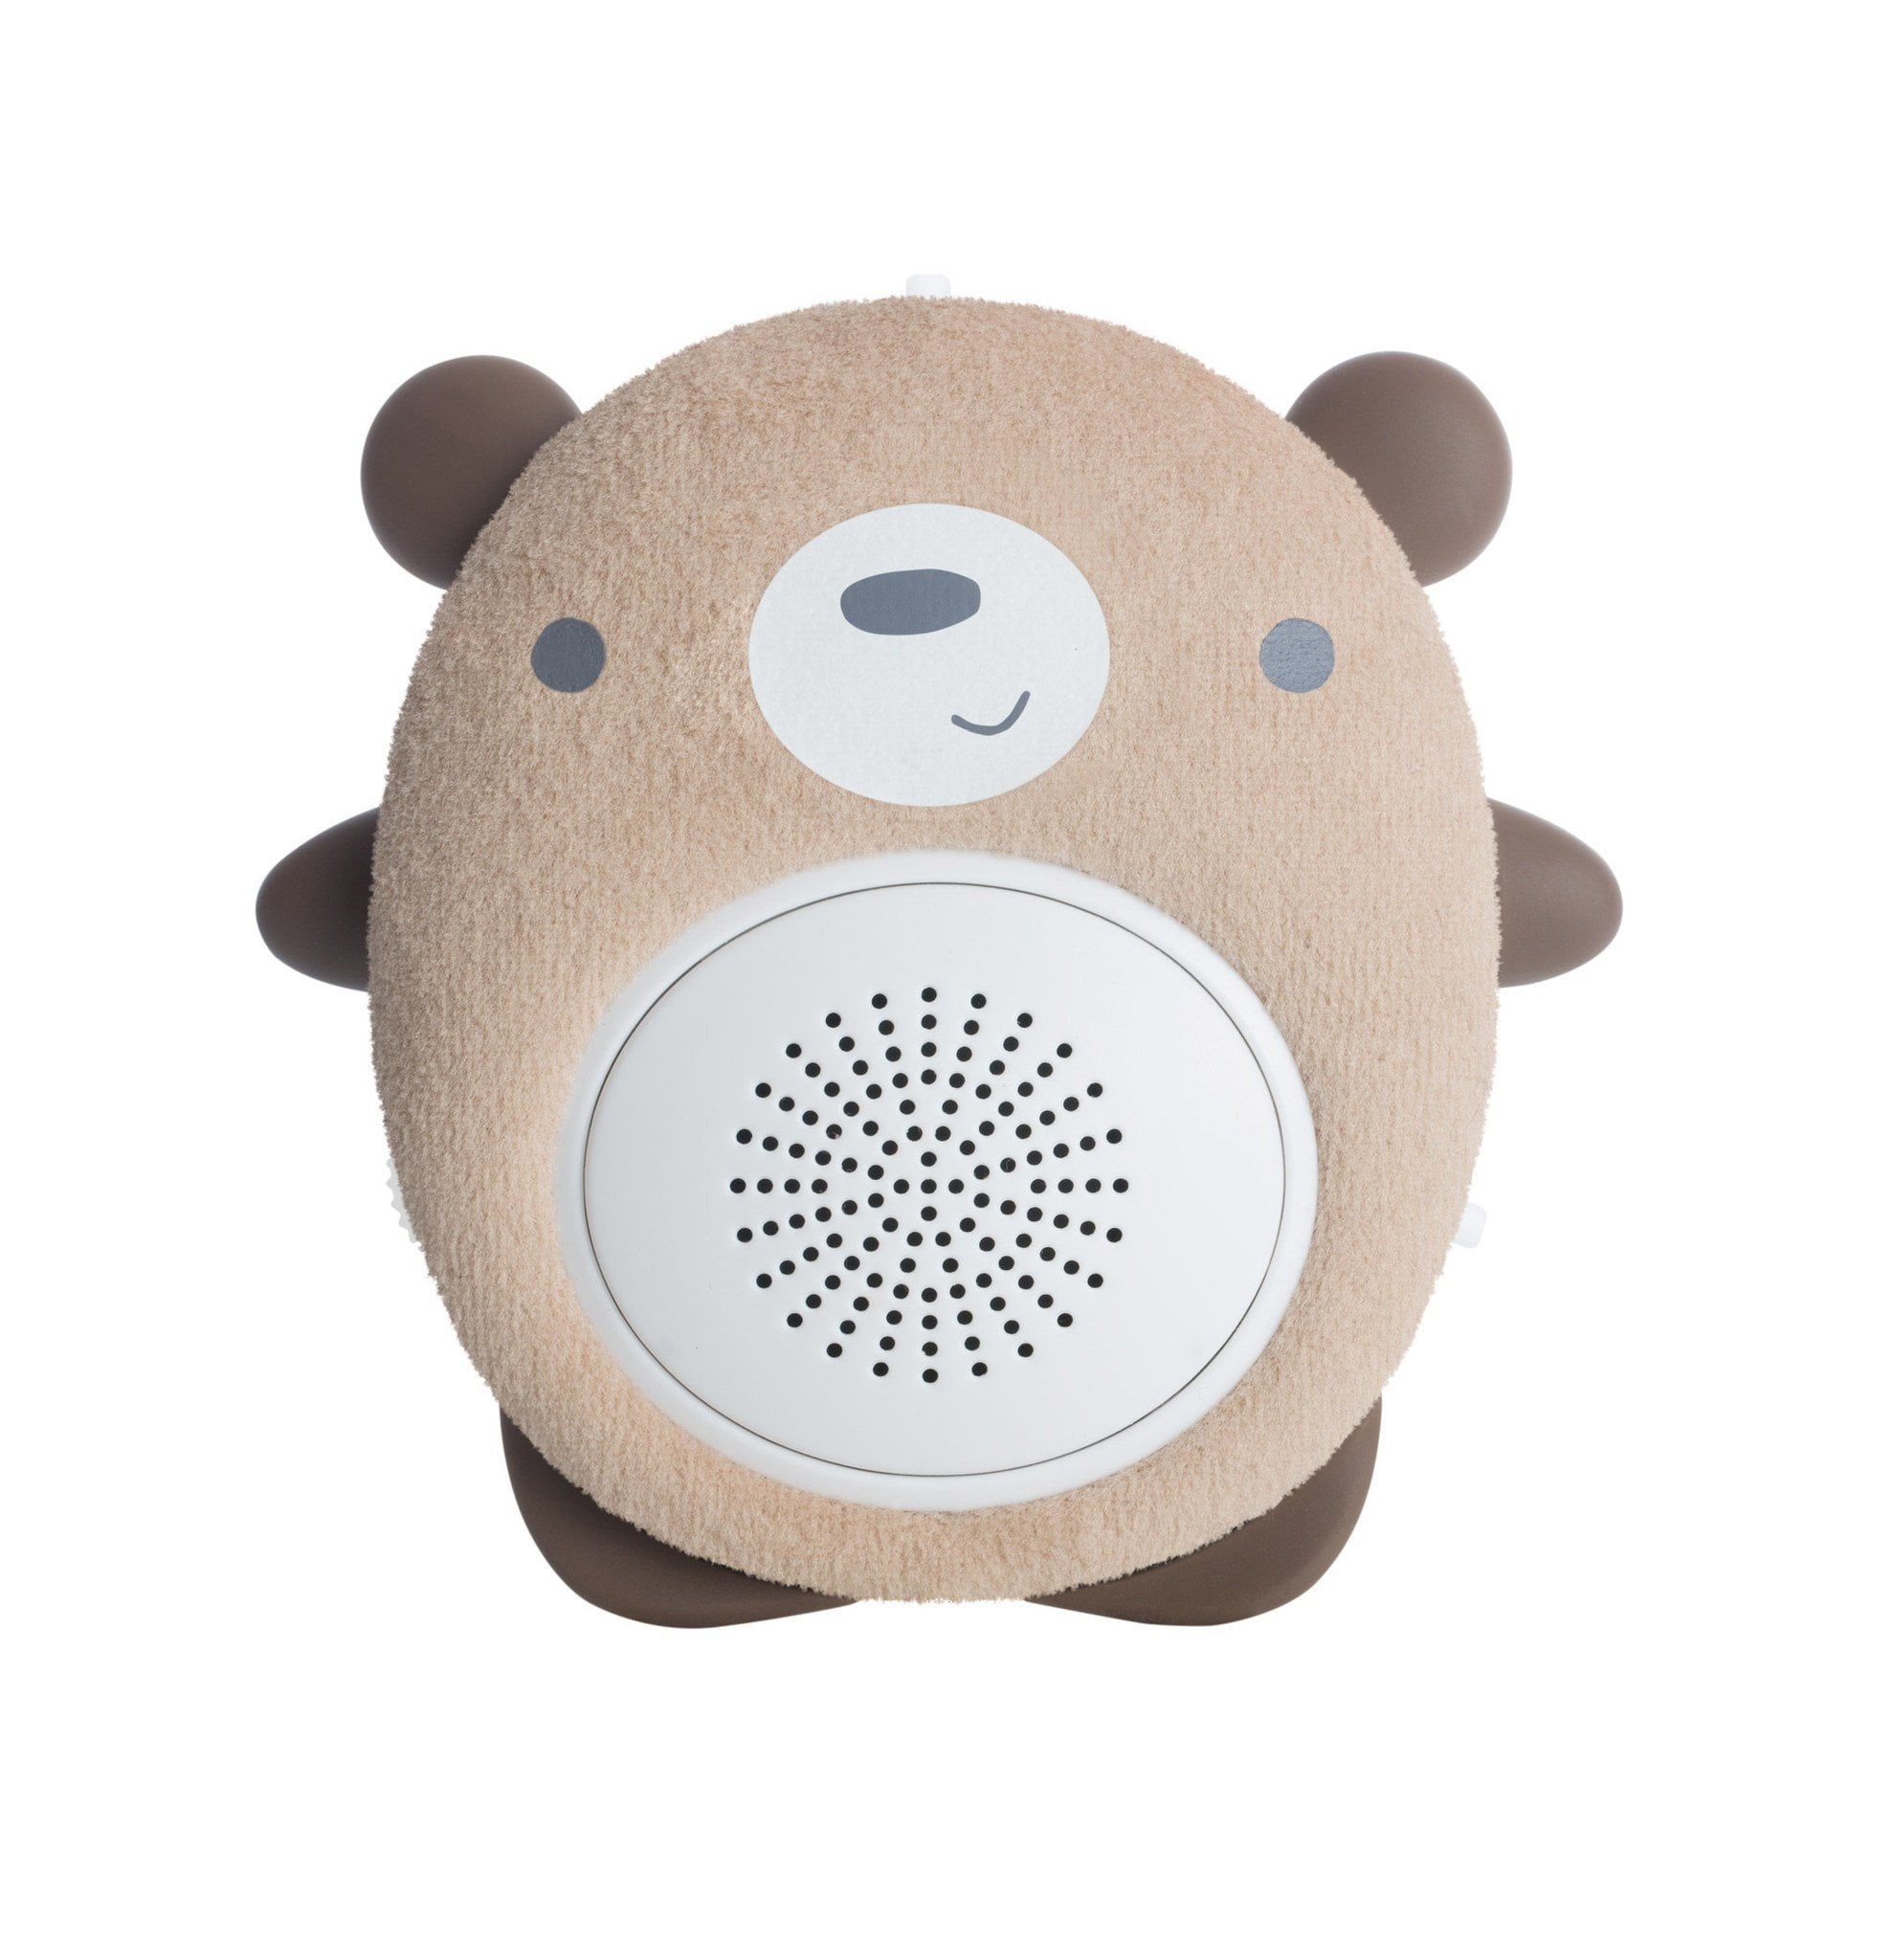 Wusic Bluetooth Pregnancy Belly Speaker - Play Music, Sounds and Voices to  Baby - No Annoying Wires 